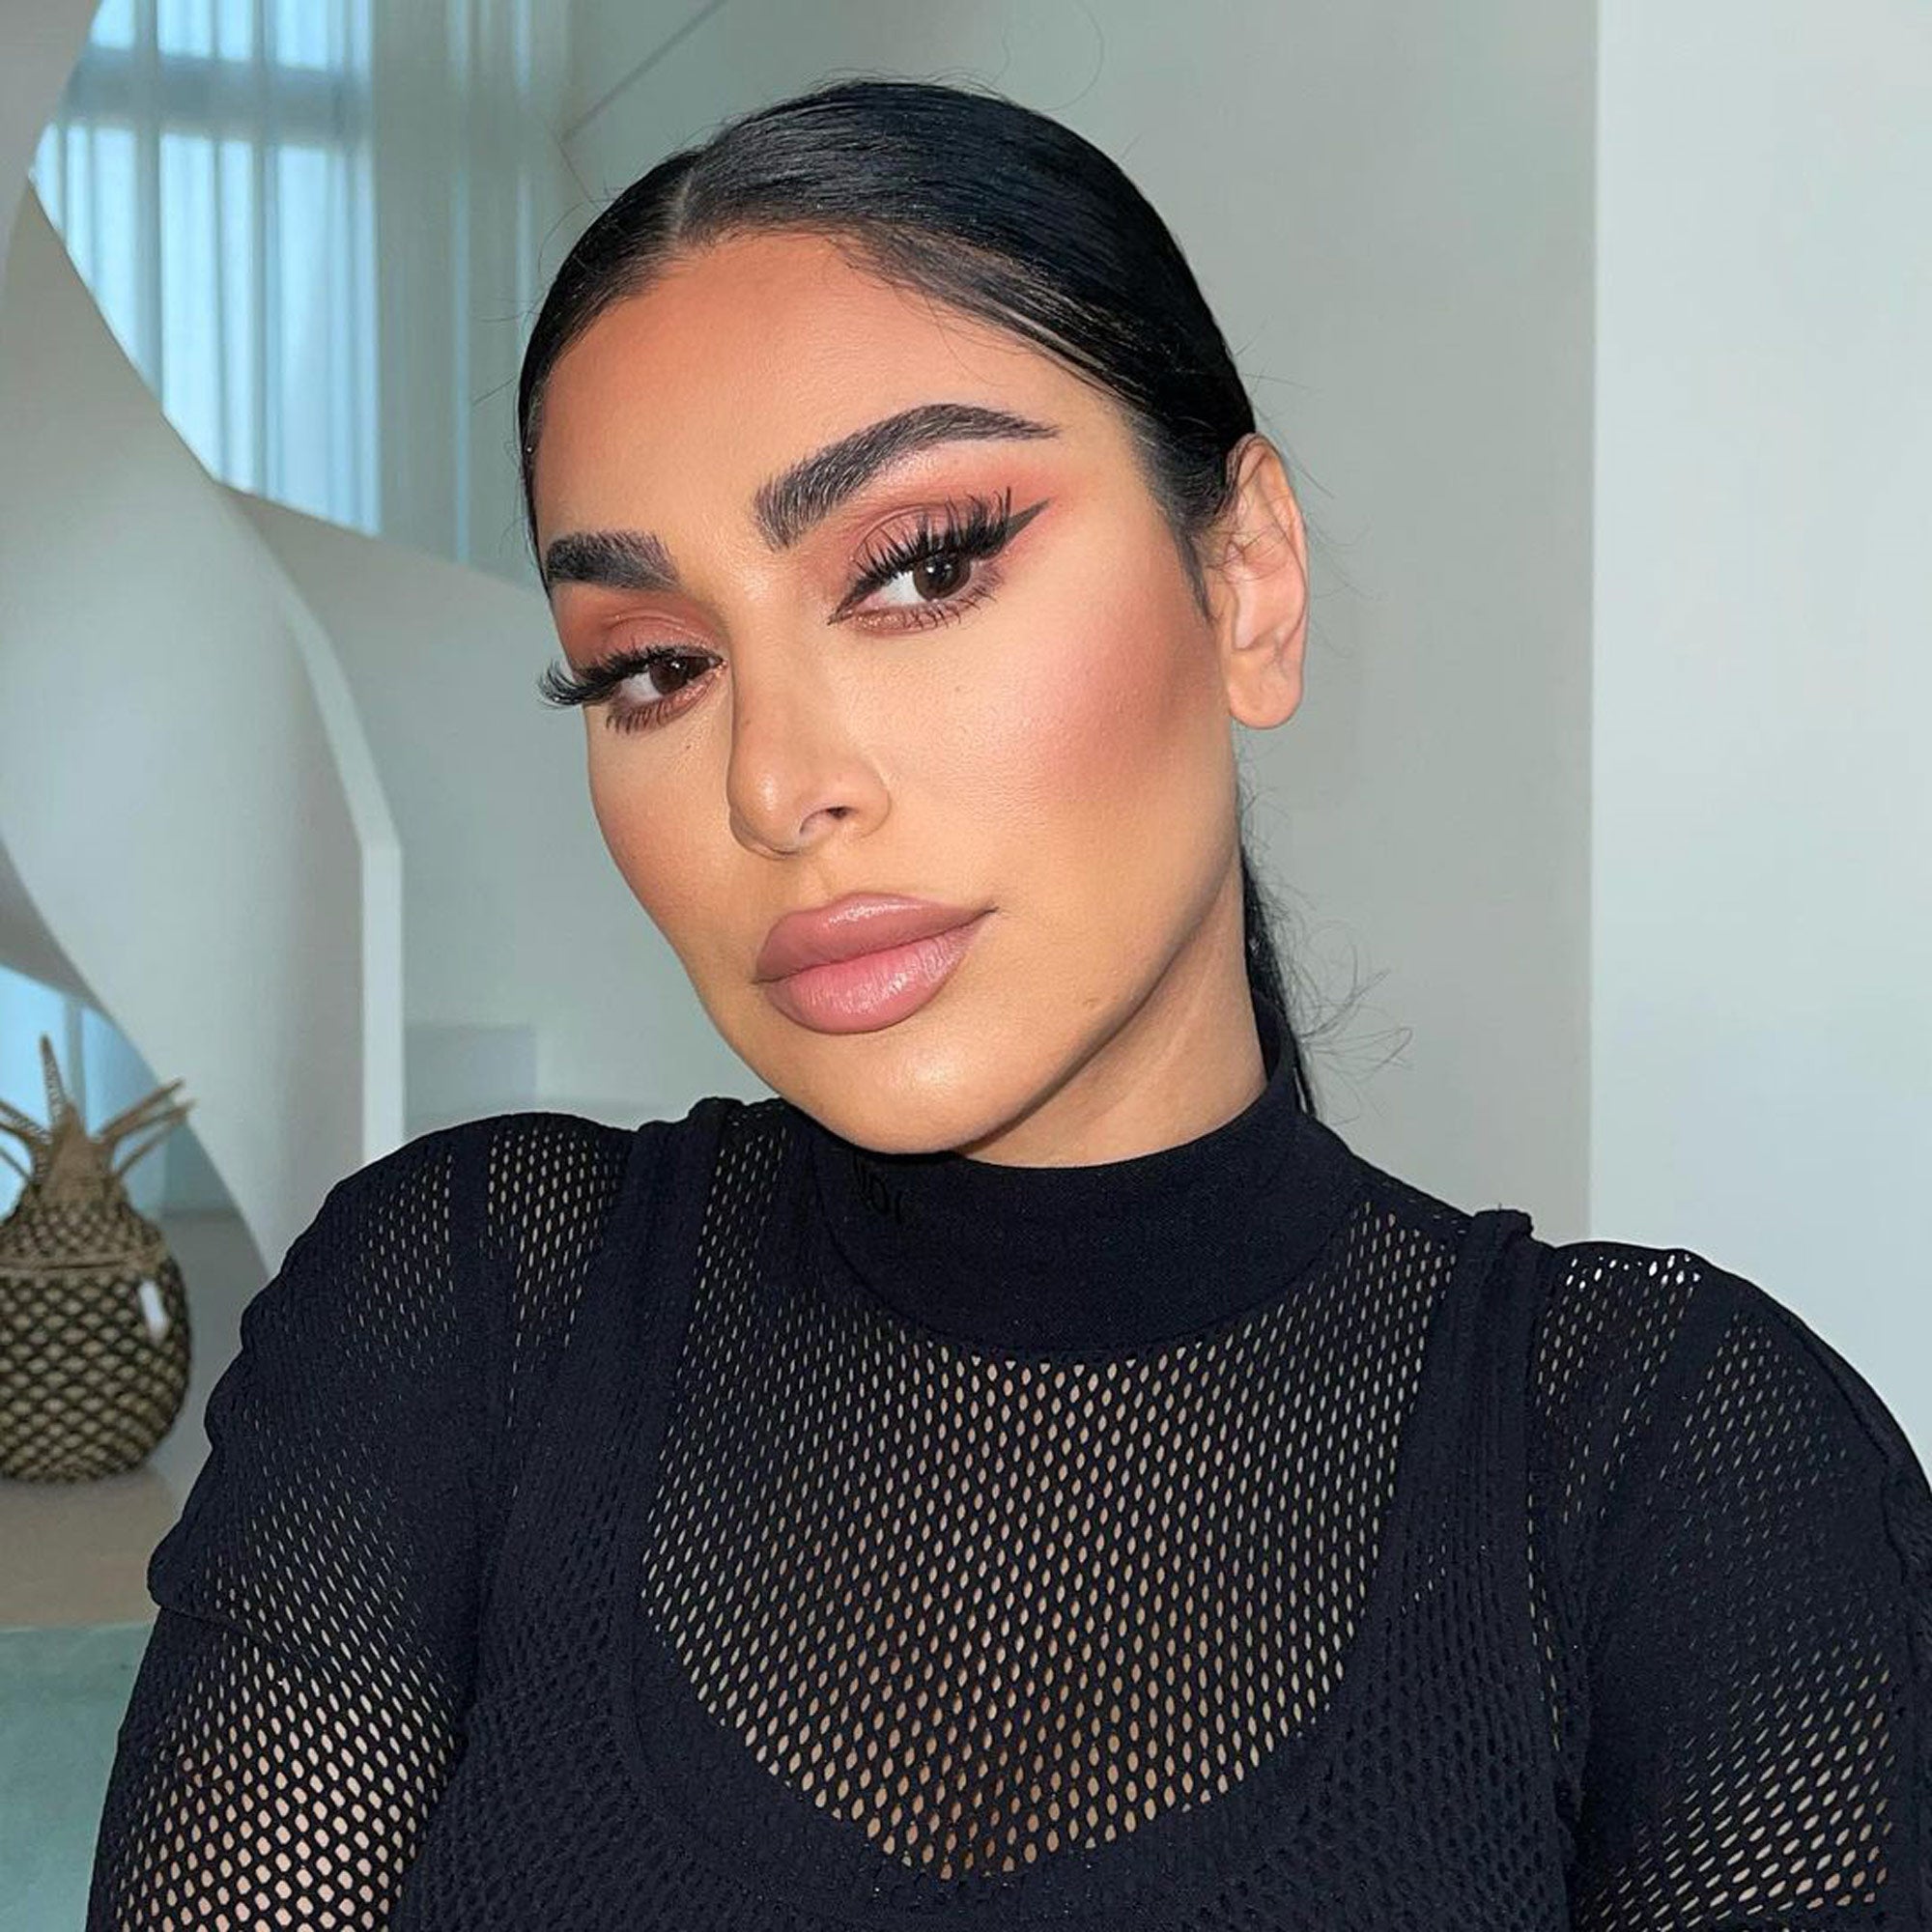 How To Achieve Soft Glam Makeup In 5 Steps By Huda Kattan Name Group